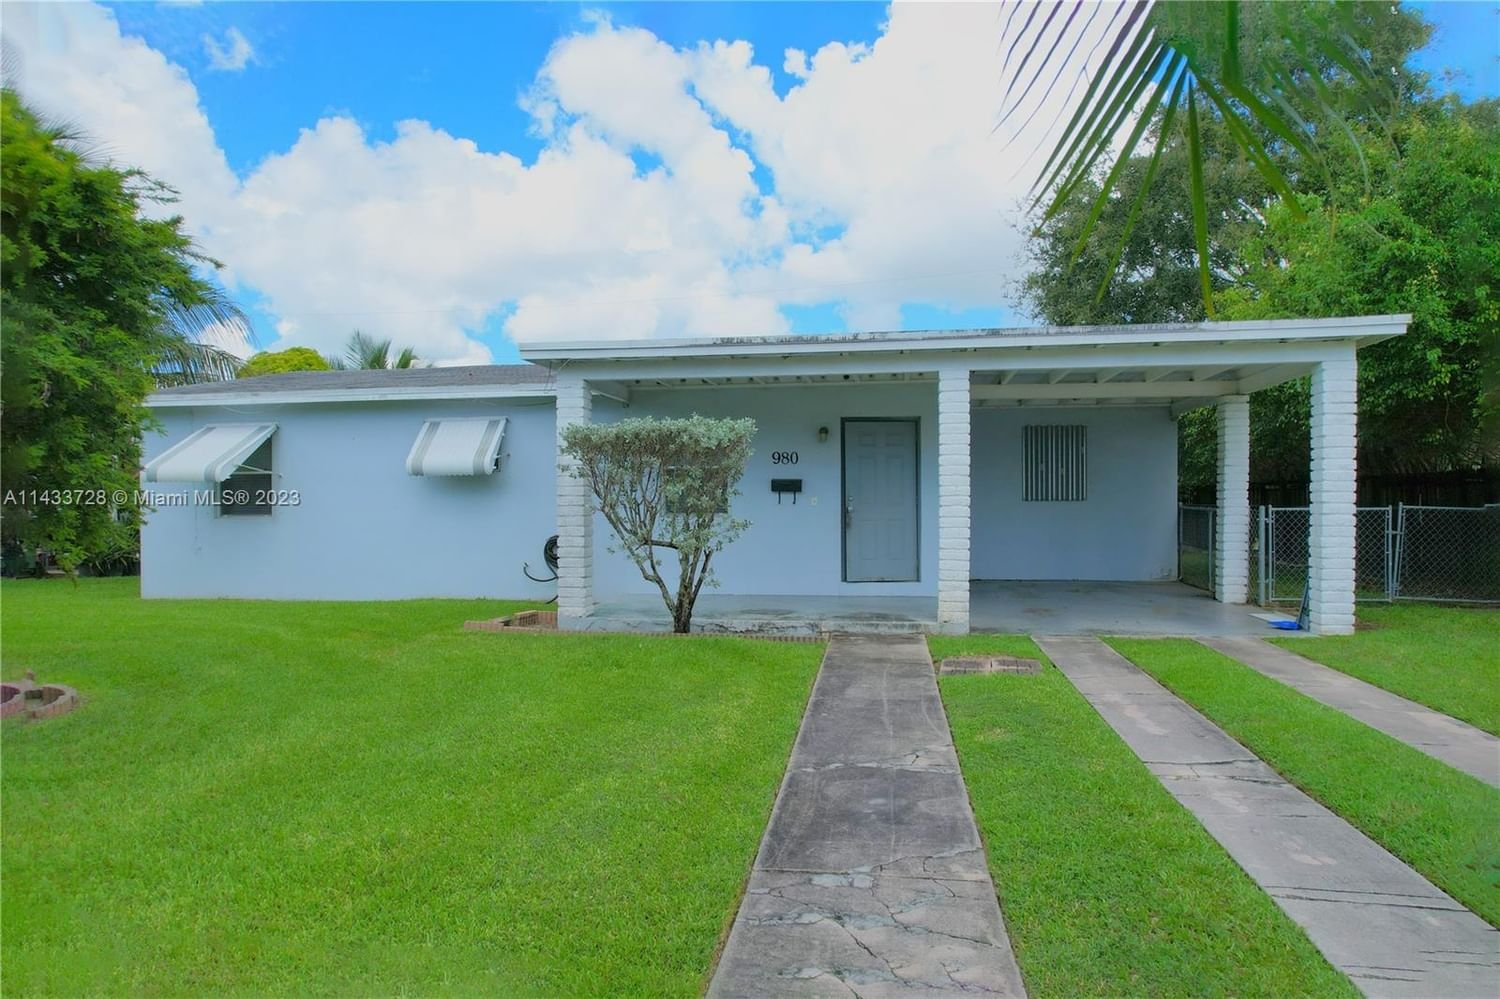 Real estate property located at 980 14th Ave, Miami-Dade County, Homestead, FL